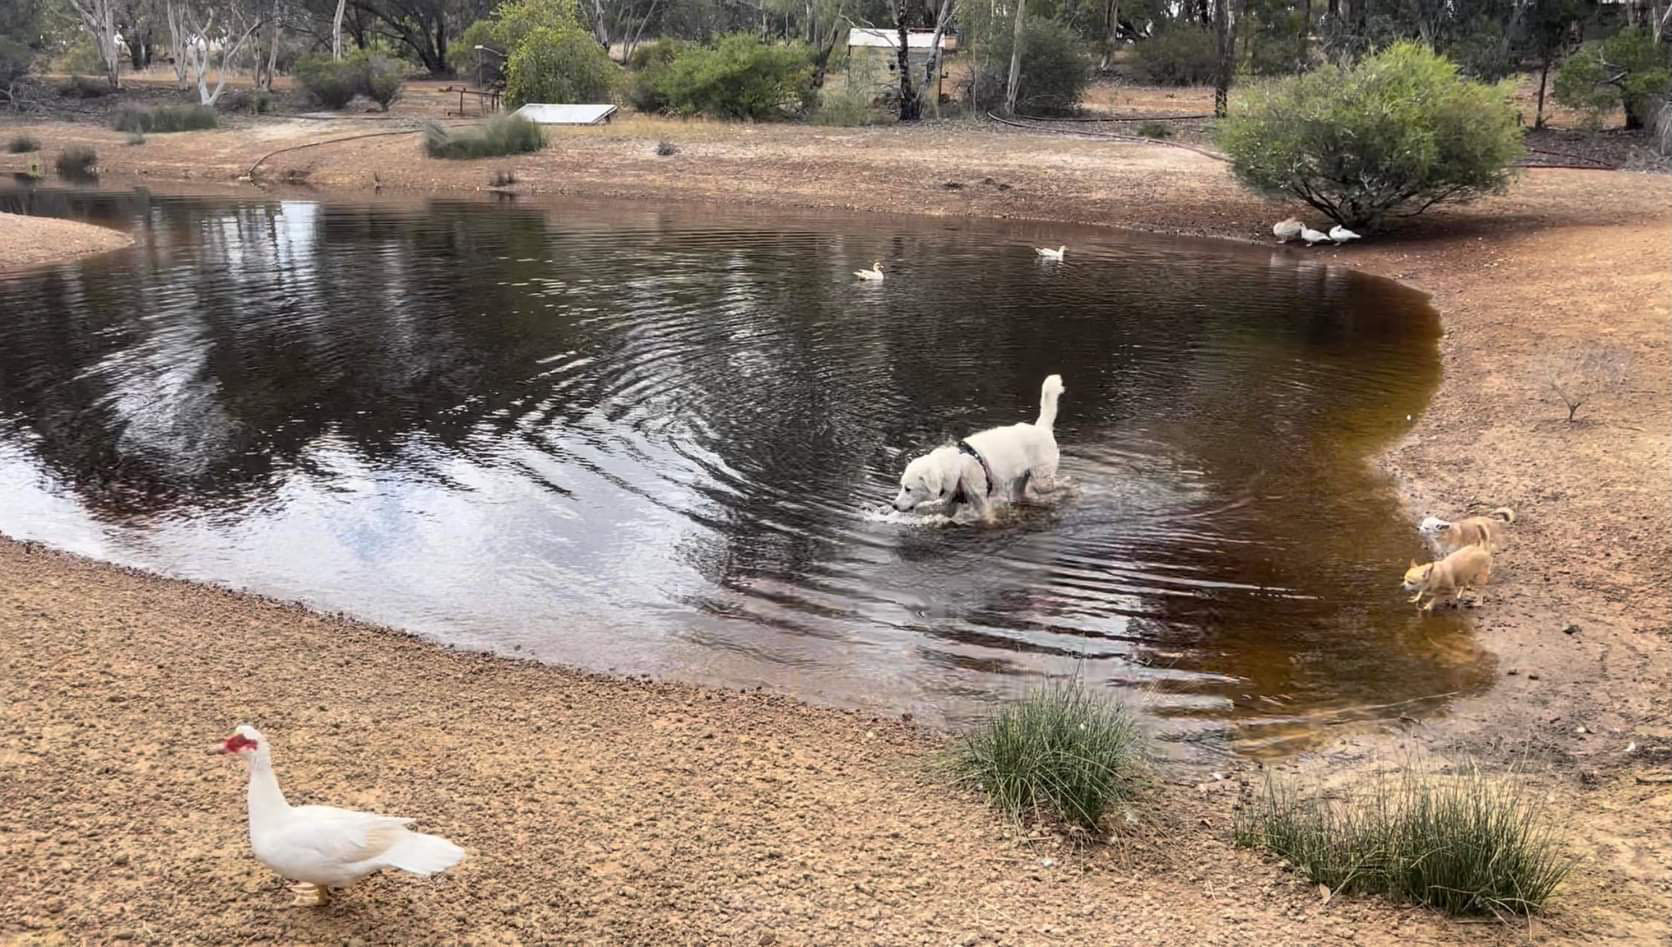 Murphy the Maremma -- a large white dog cooling off in a river